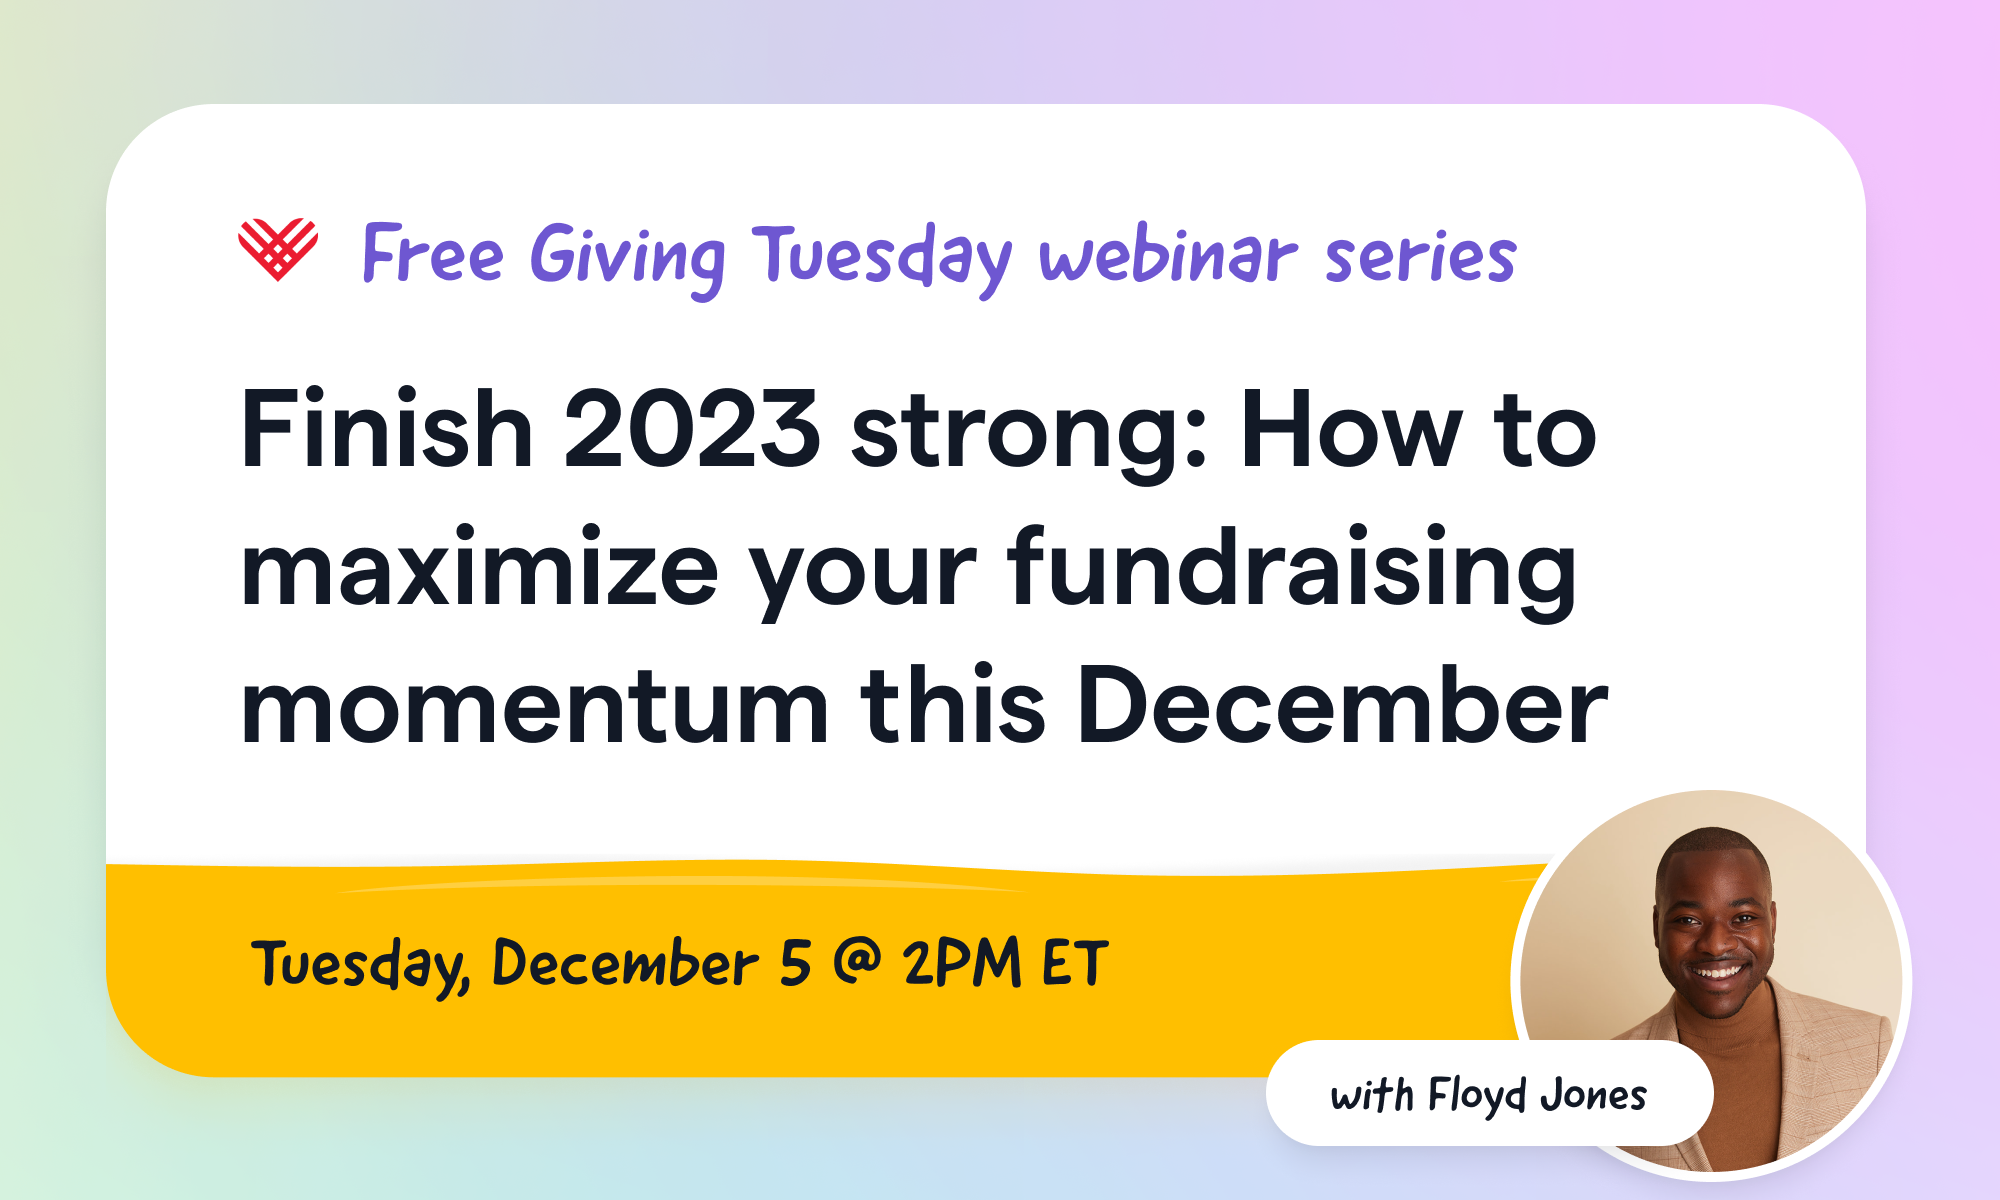 Finish 2023 strong: How to maximize your fundraising momentum this December